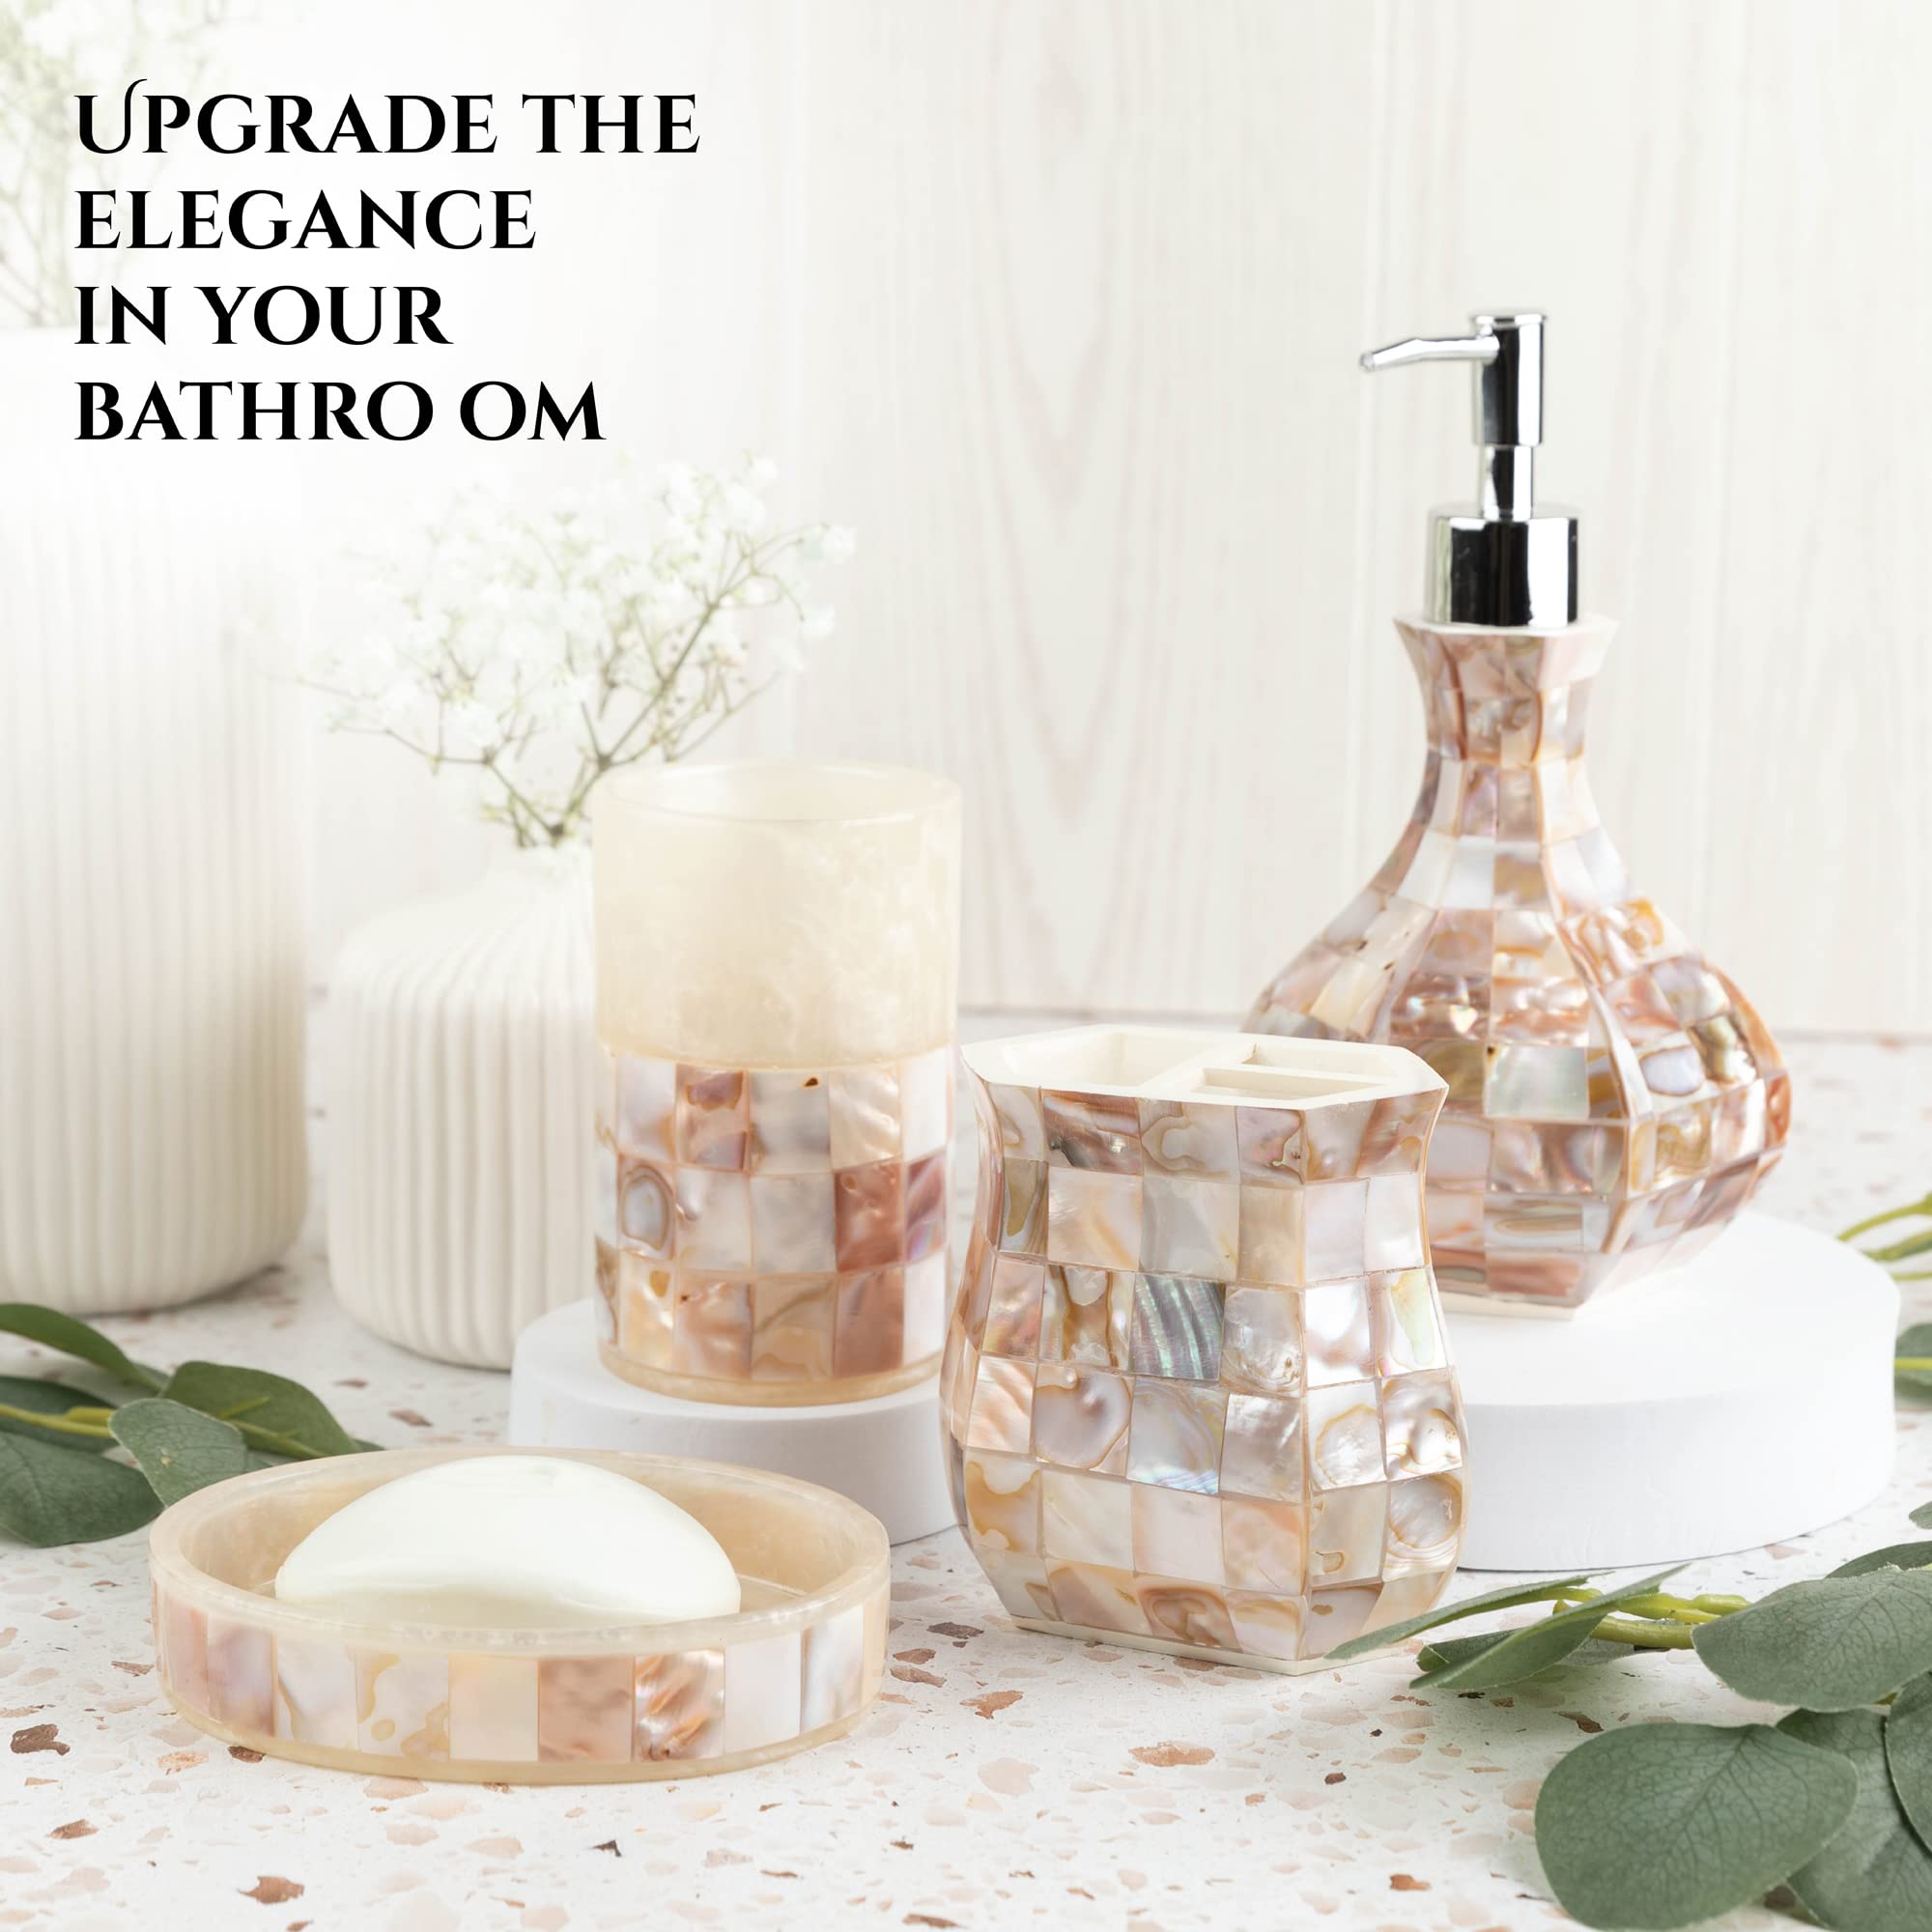 Bathroom Accessories Set - 4 Piece Bathroom Accessory Set with Natural Mother of Pearl Shells - Decorative Bathroom Set Includes: Soap Dispenser, Toothbrush Holder, Tumbler and Soap Dish  - Like New